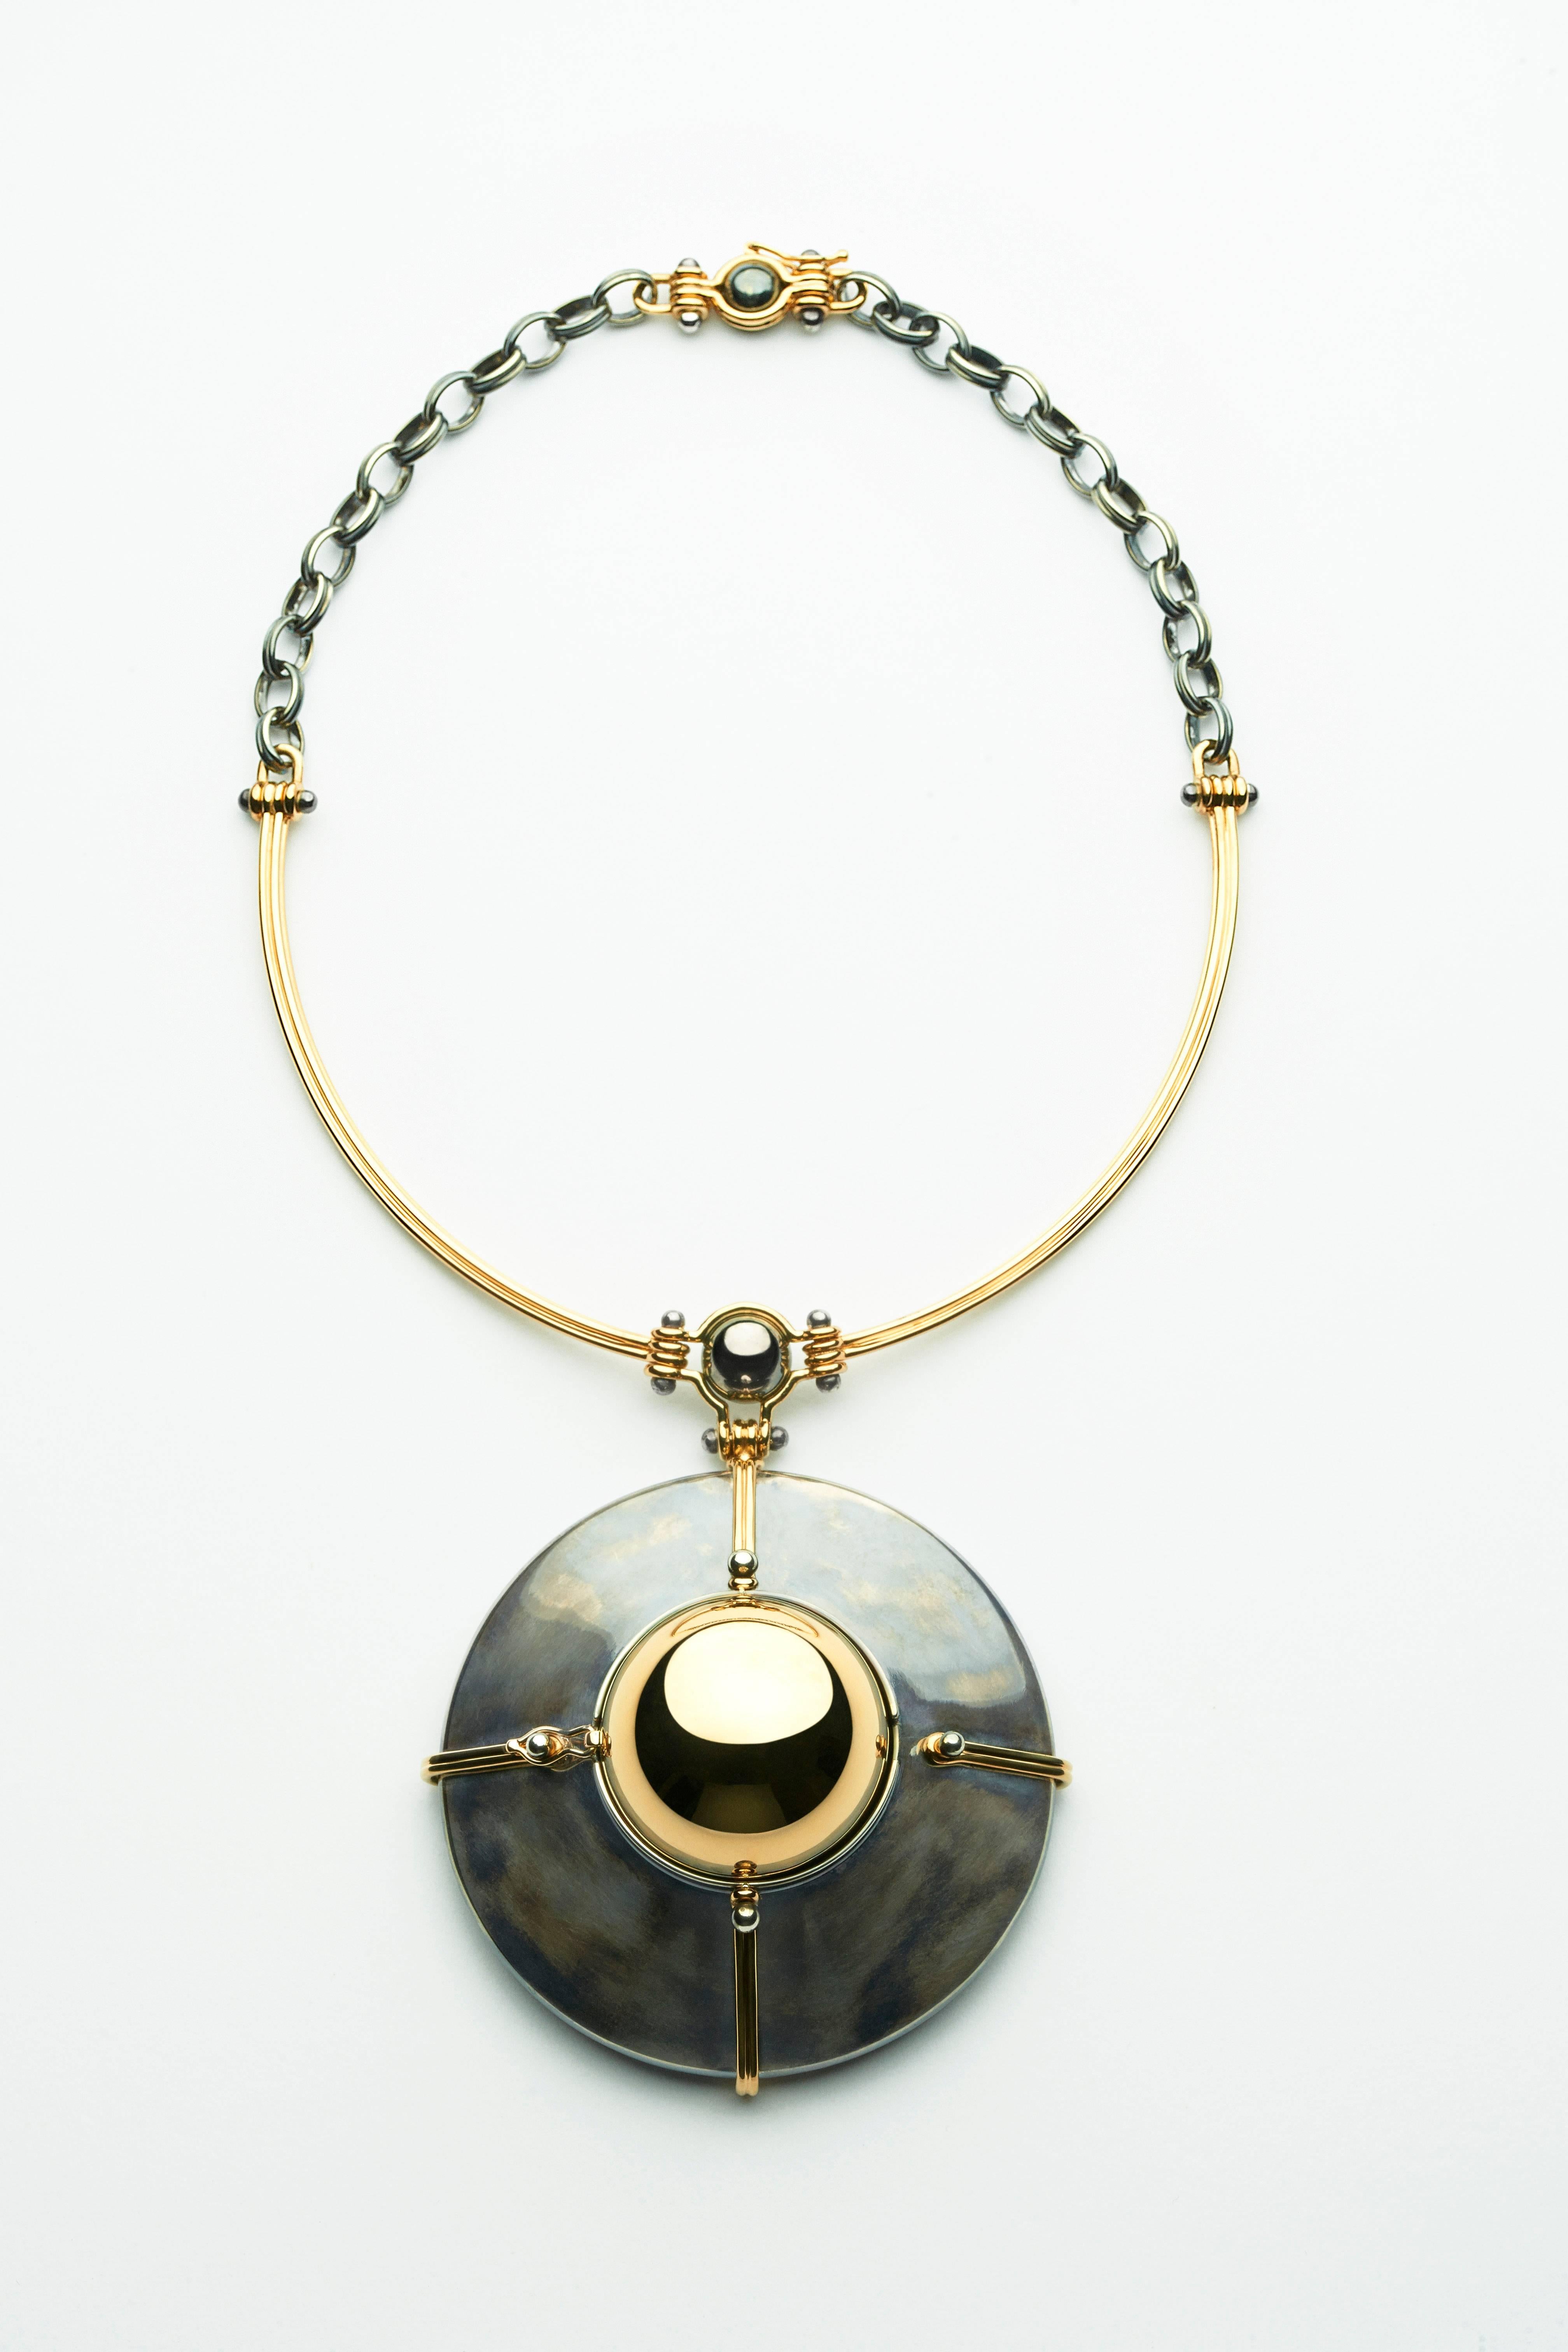 Scaphandre Pendant Yellow Gold Chrysocolle Diamond

Yellow Gold and Patinated silver choker pendant, made of an articulated yellow gold strand and a distressed silver chain. The Yellow gold sphere is rotating on a distressed silver structure bound